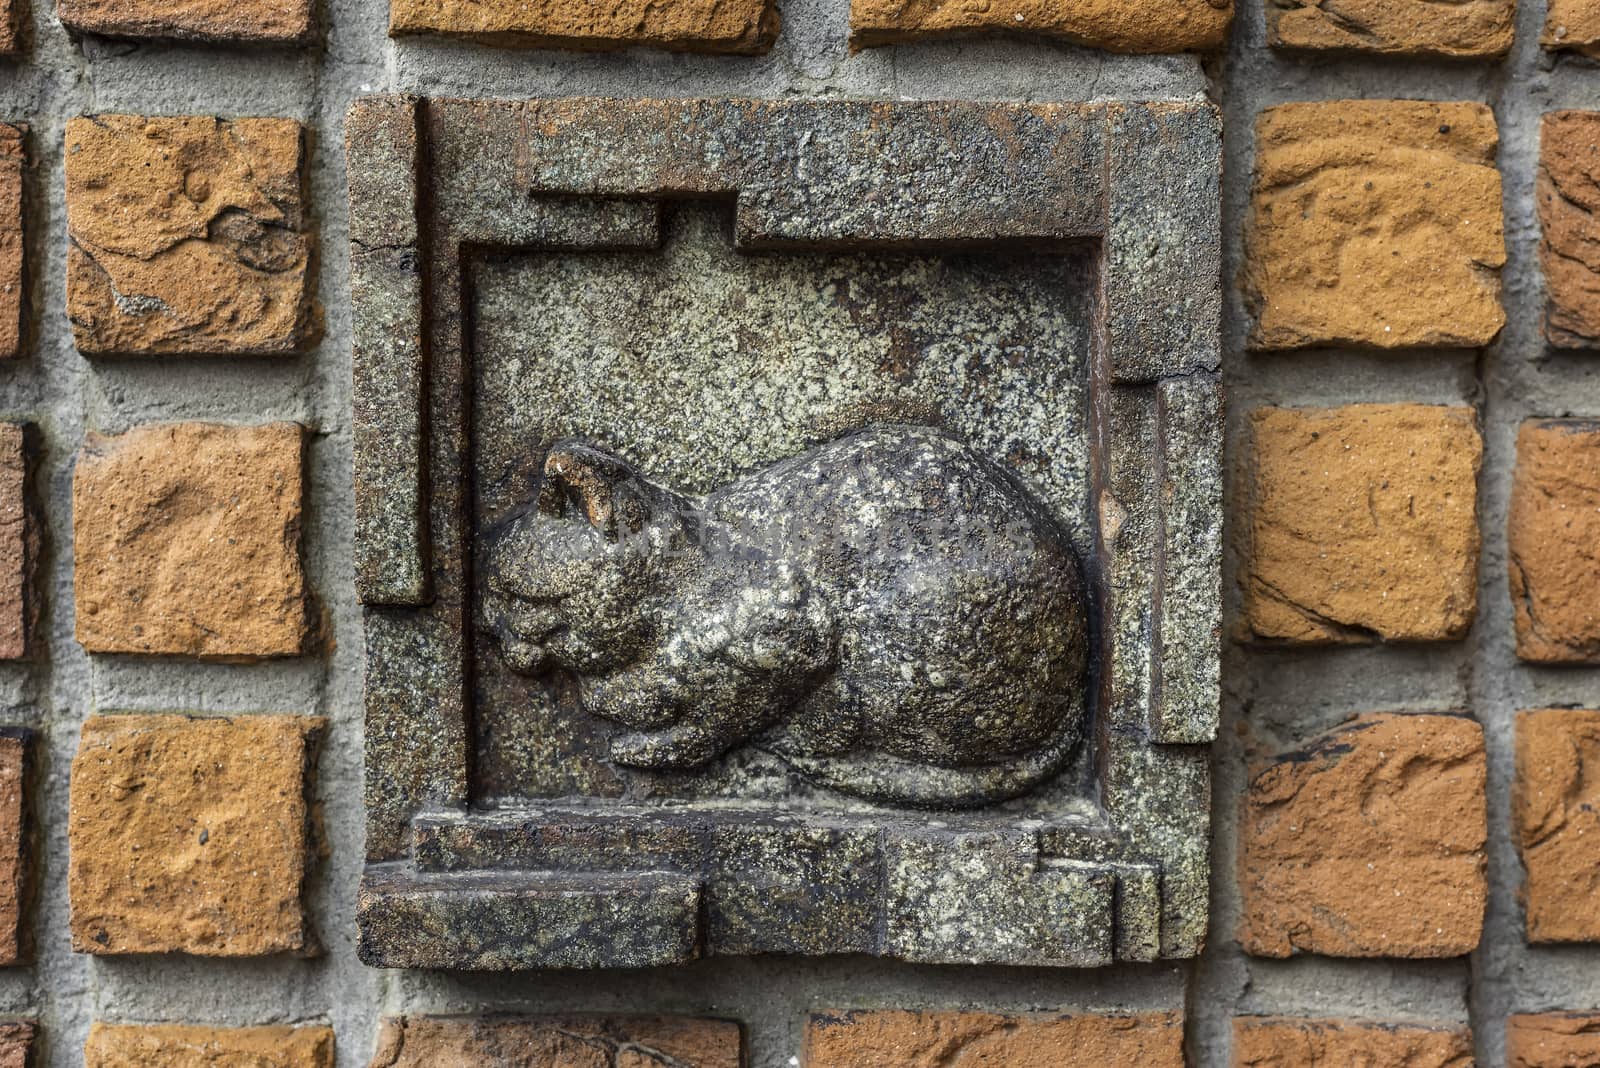 Bas reflief of a sleeping cat brown brick blended in a orage bricks wall by ankorlight